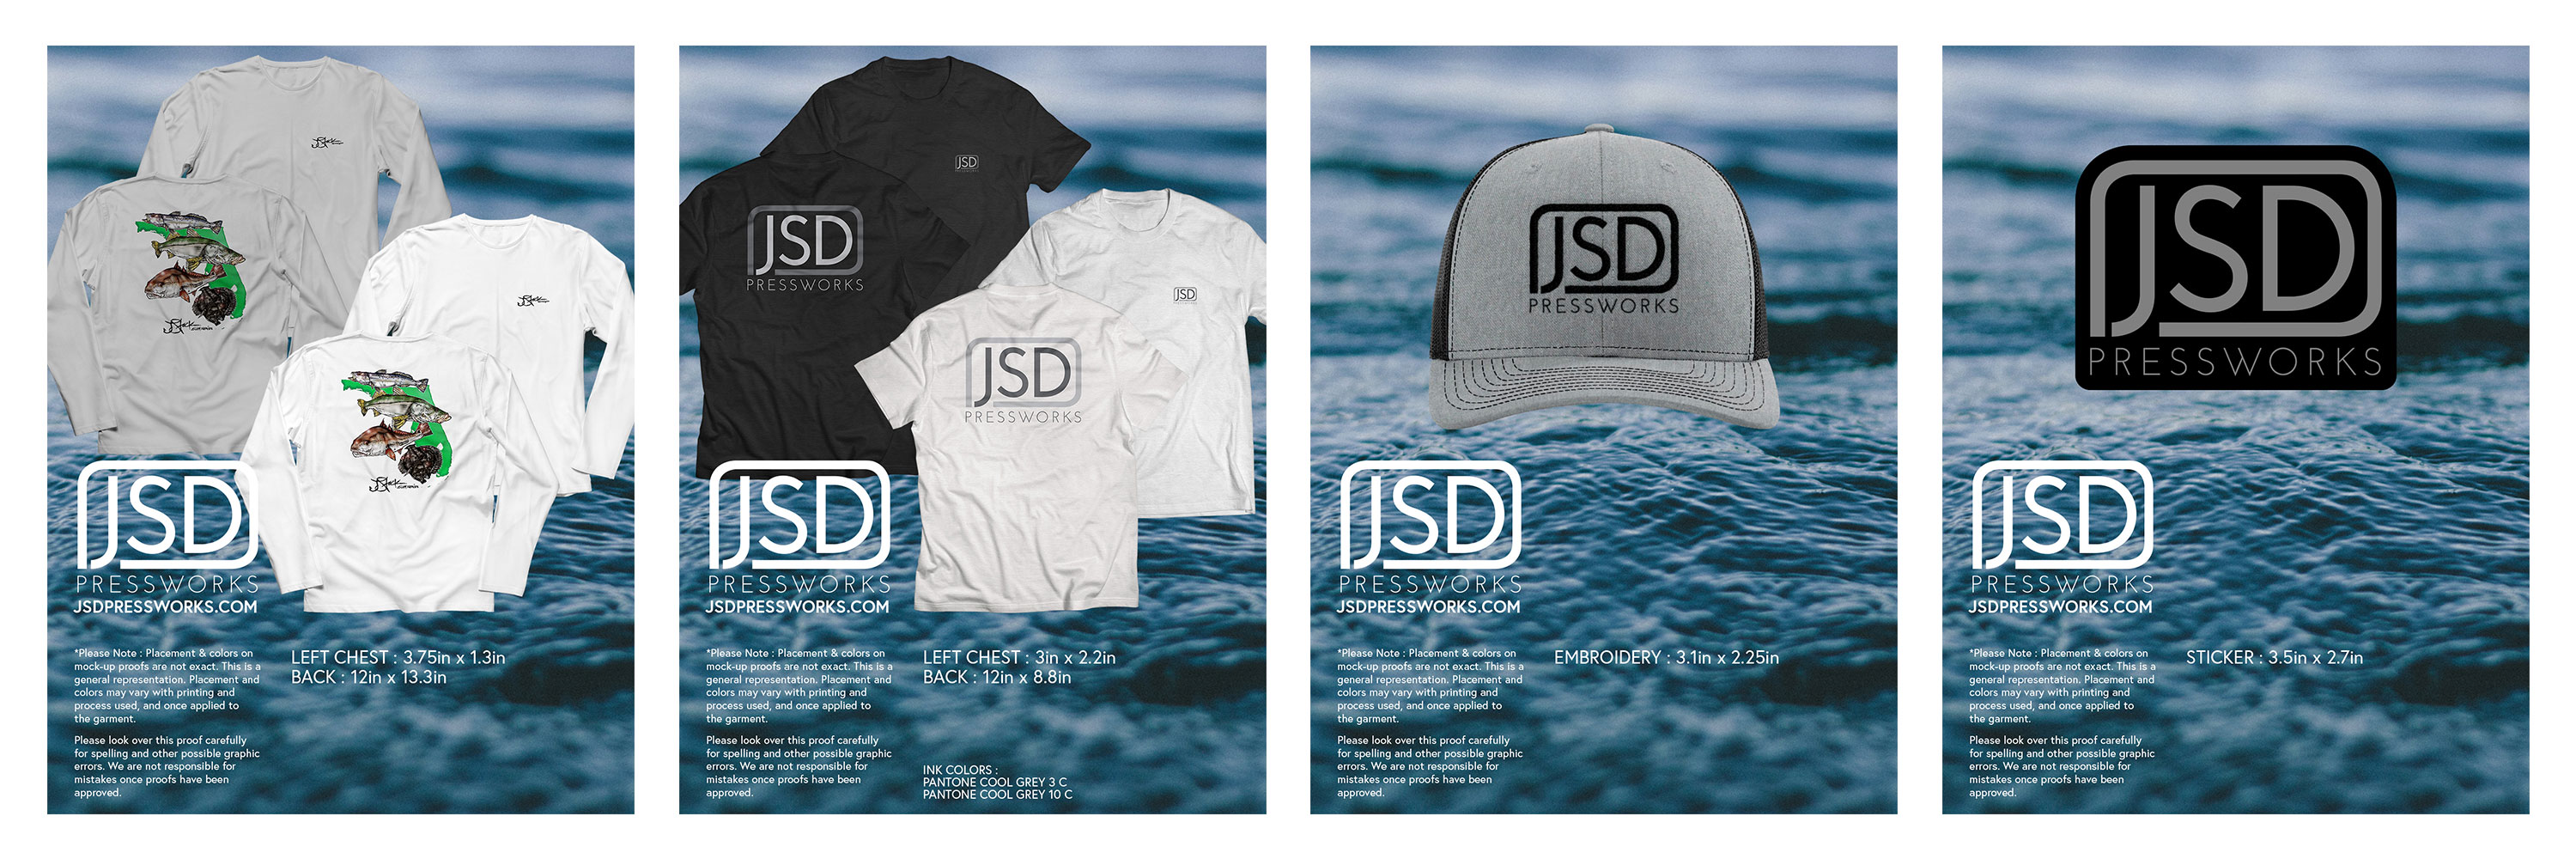 Four example mockups for sublimation printing, silkscreen printing, embroidery, and printed sticker products.